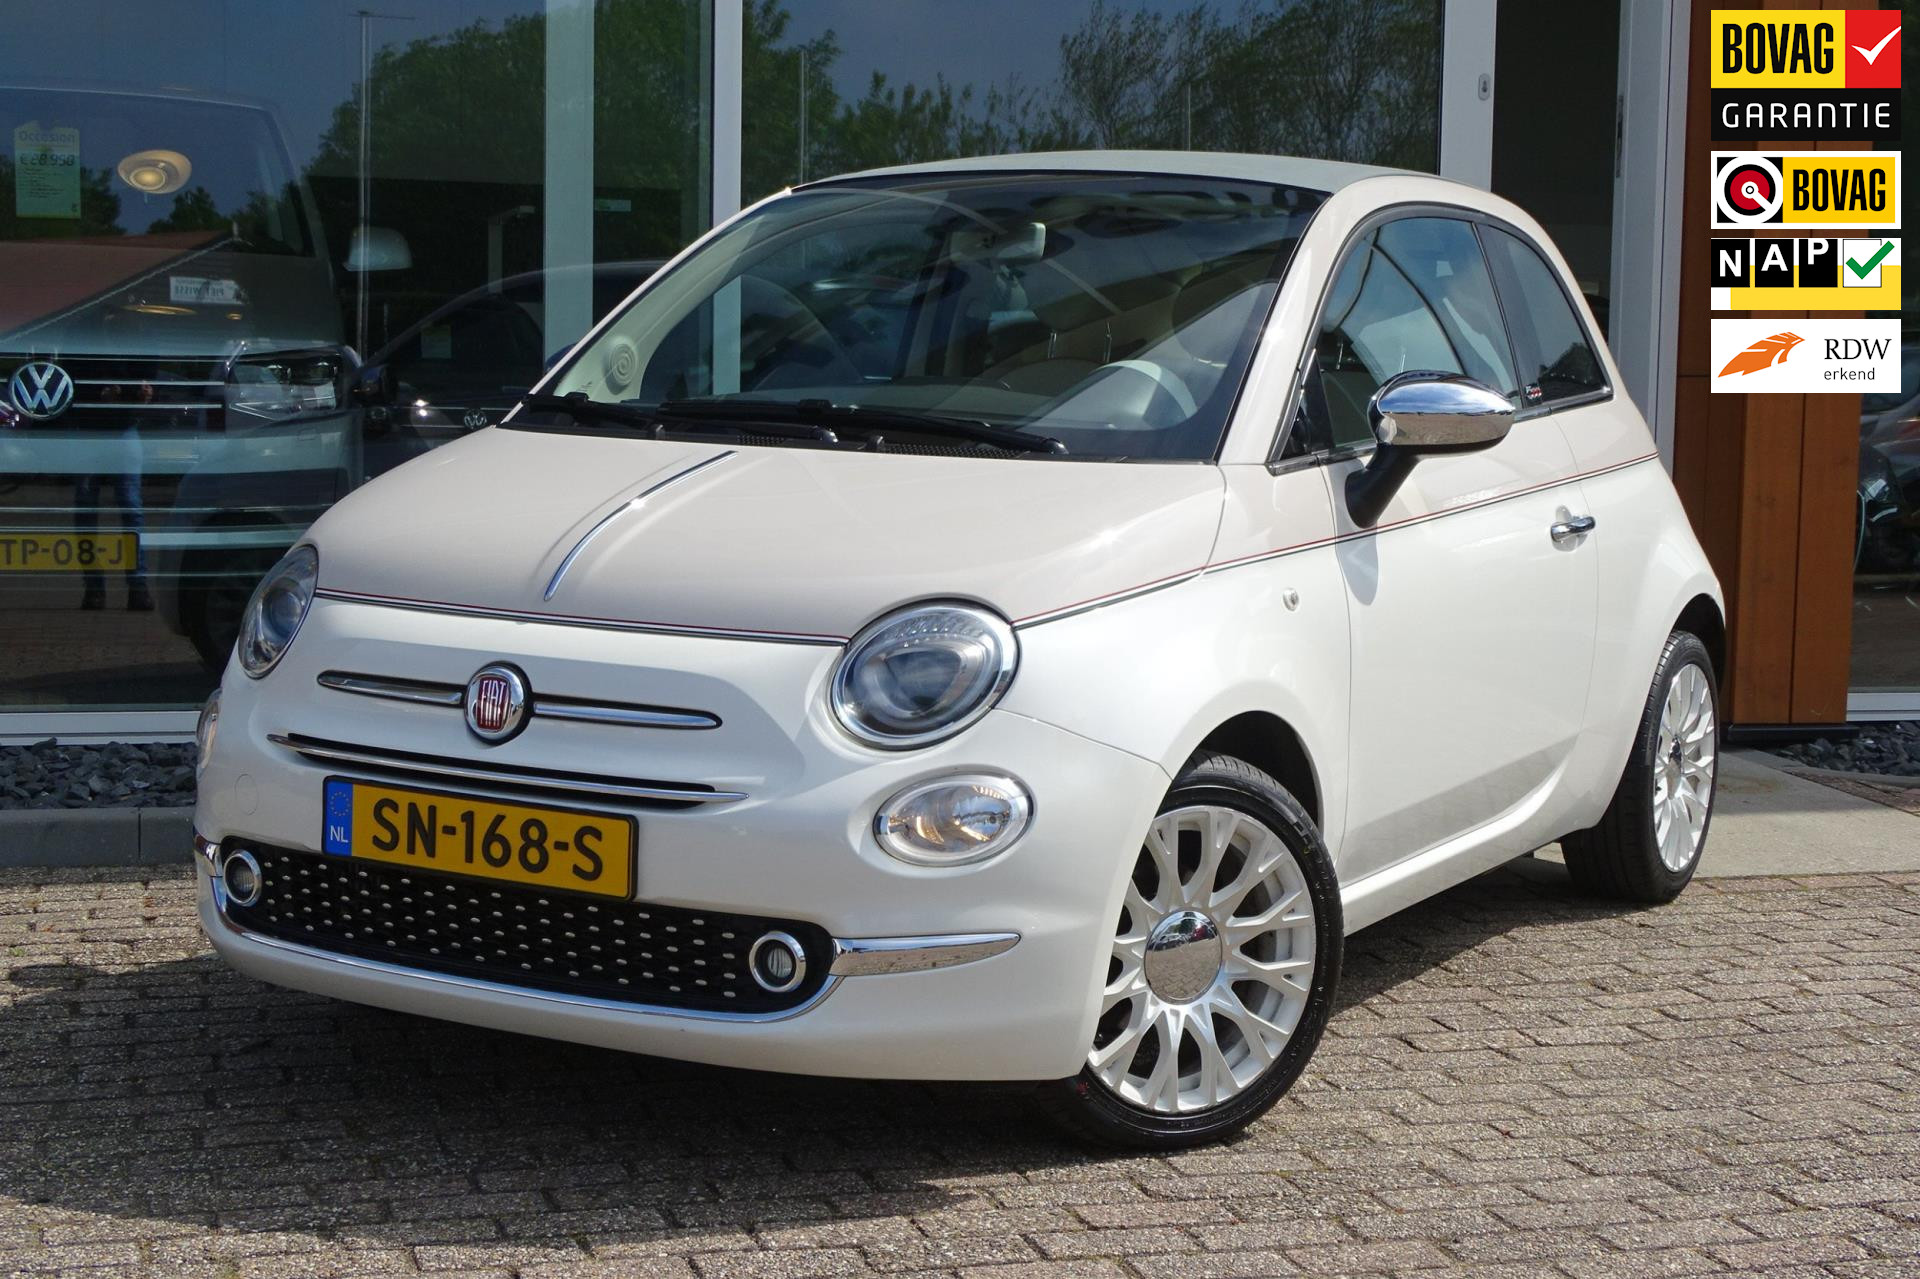 Fiat 500 C 0.9 TwinAir Turbo Forever Young